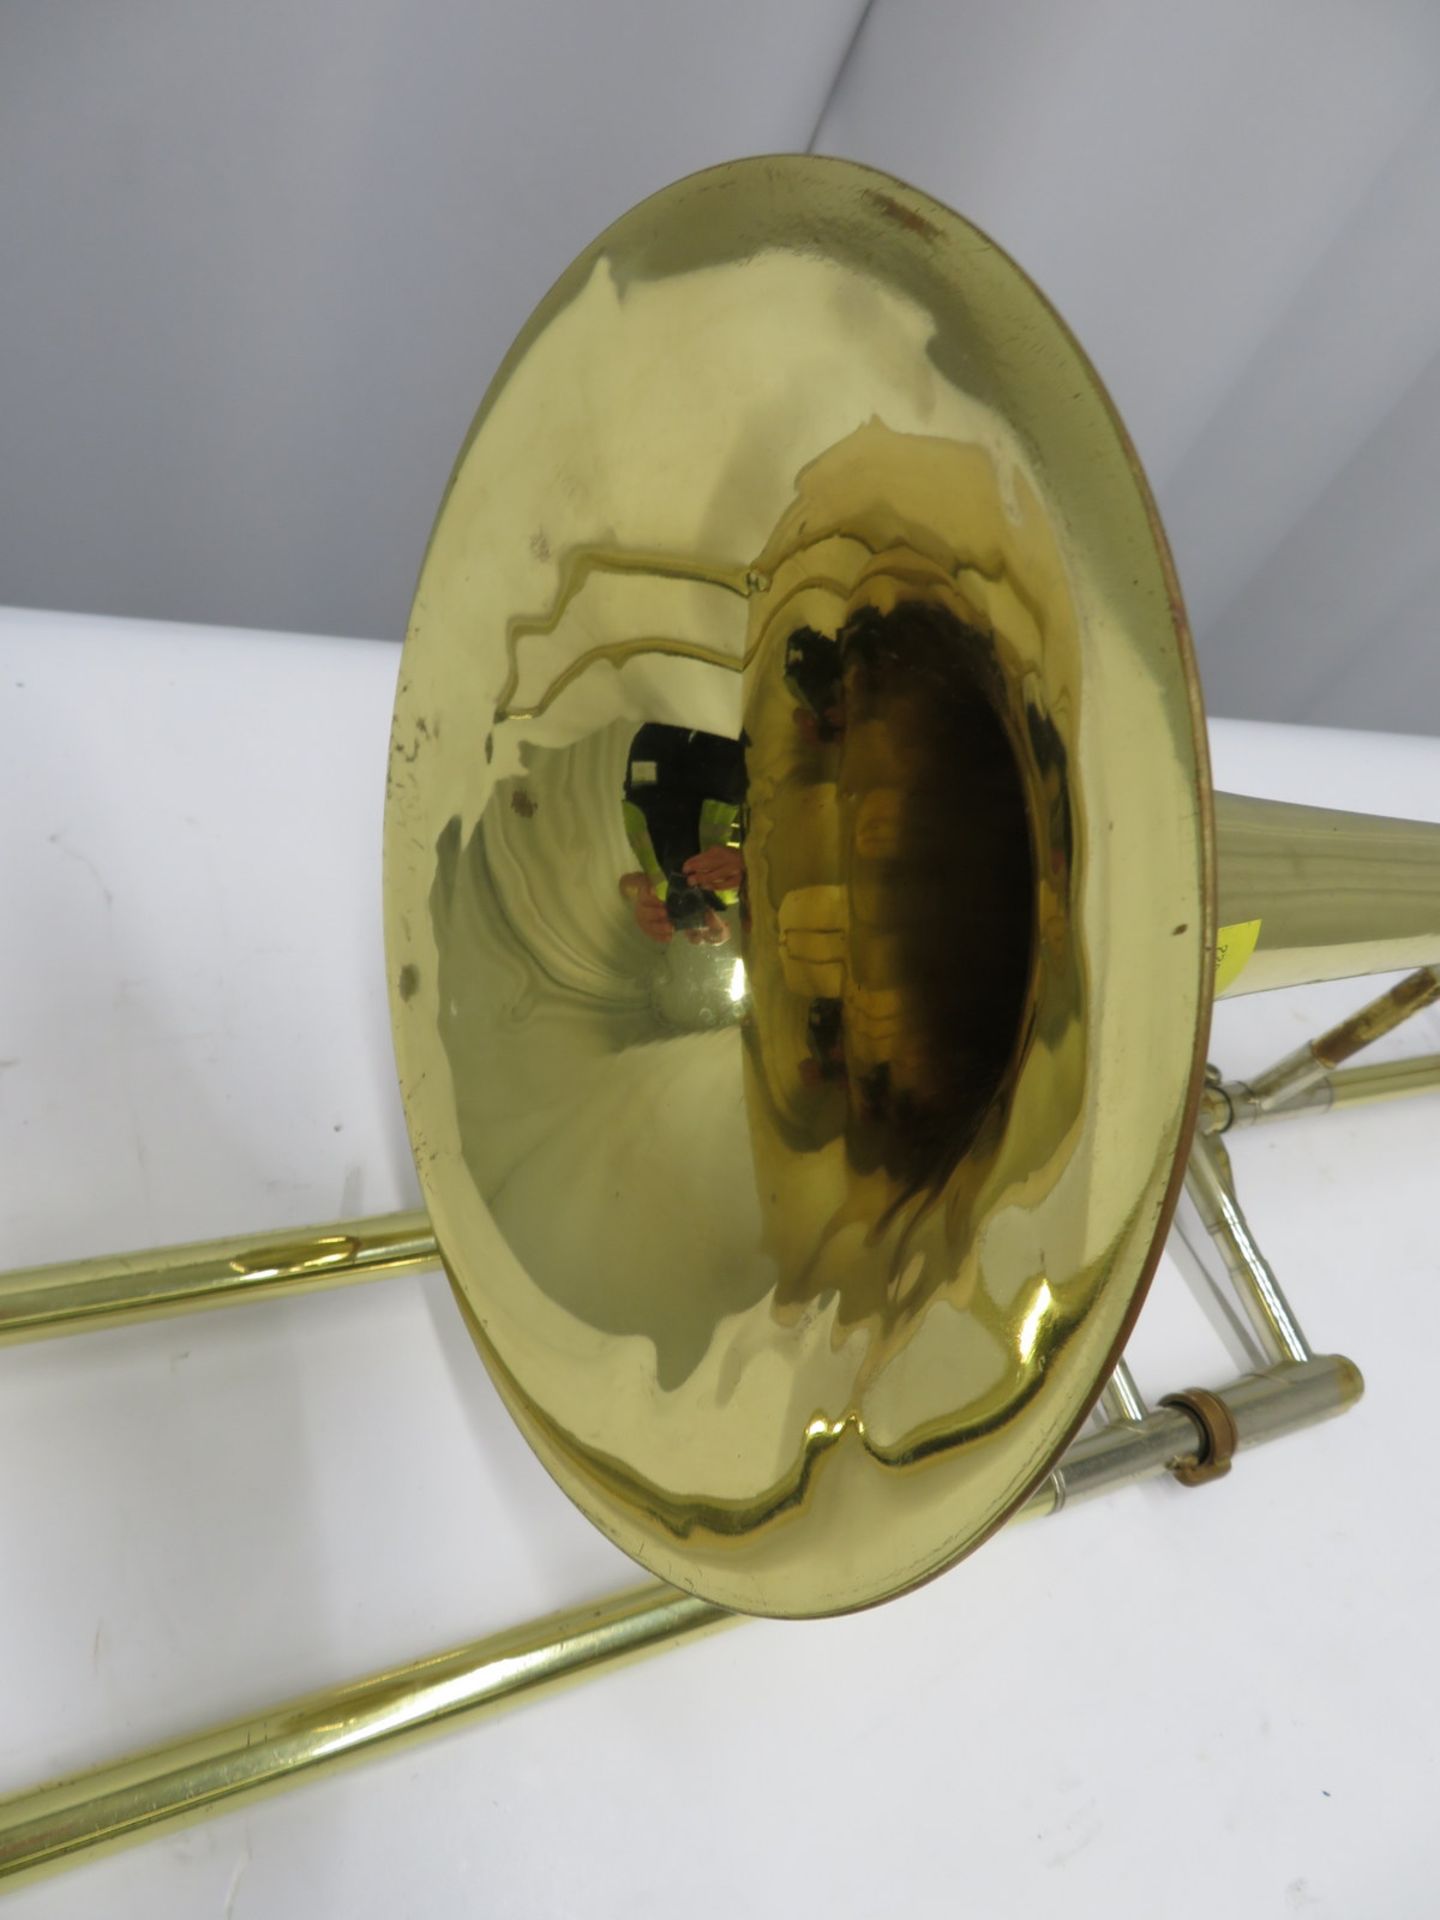 Rath R4 trombone with case. Serial number: R4140. - Image 10 of 19